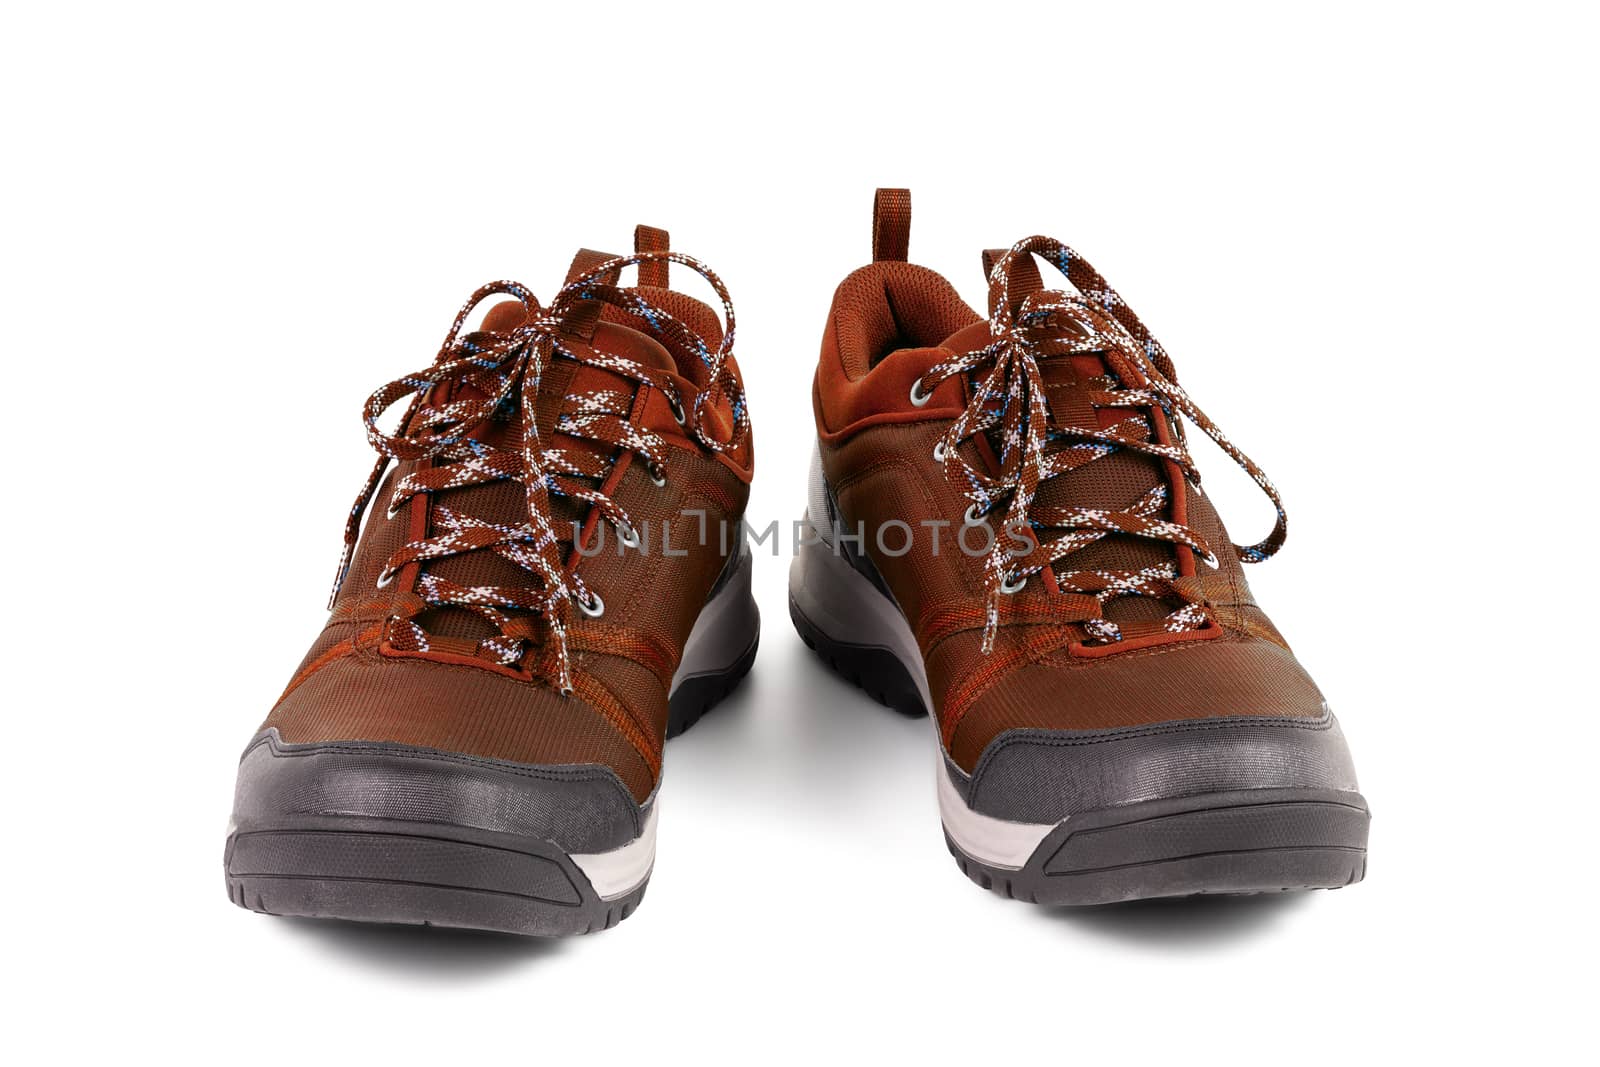 black and brown outdoor empty lightweight waterproof breathable fabric sneakers isolated on white background by z1b